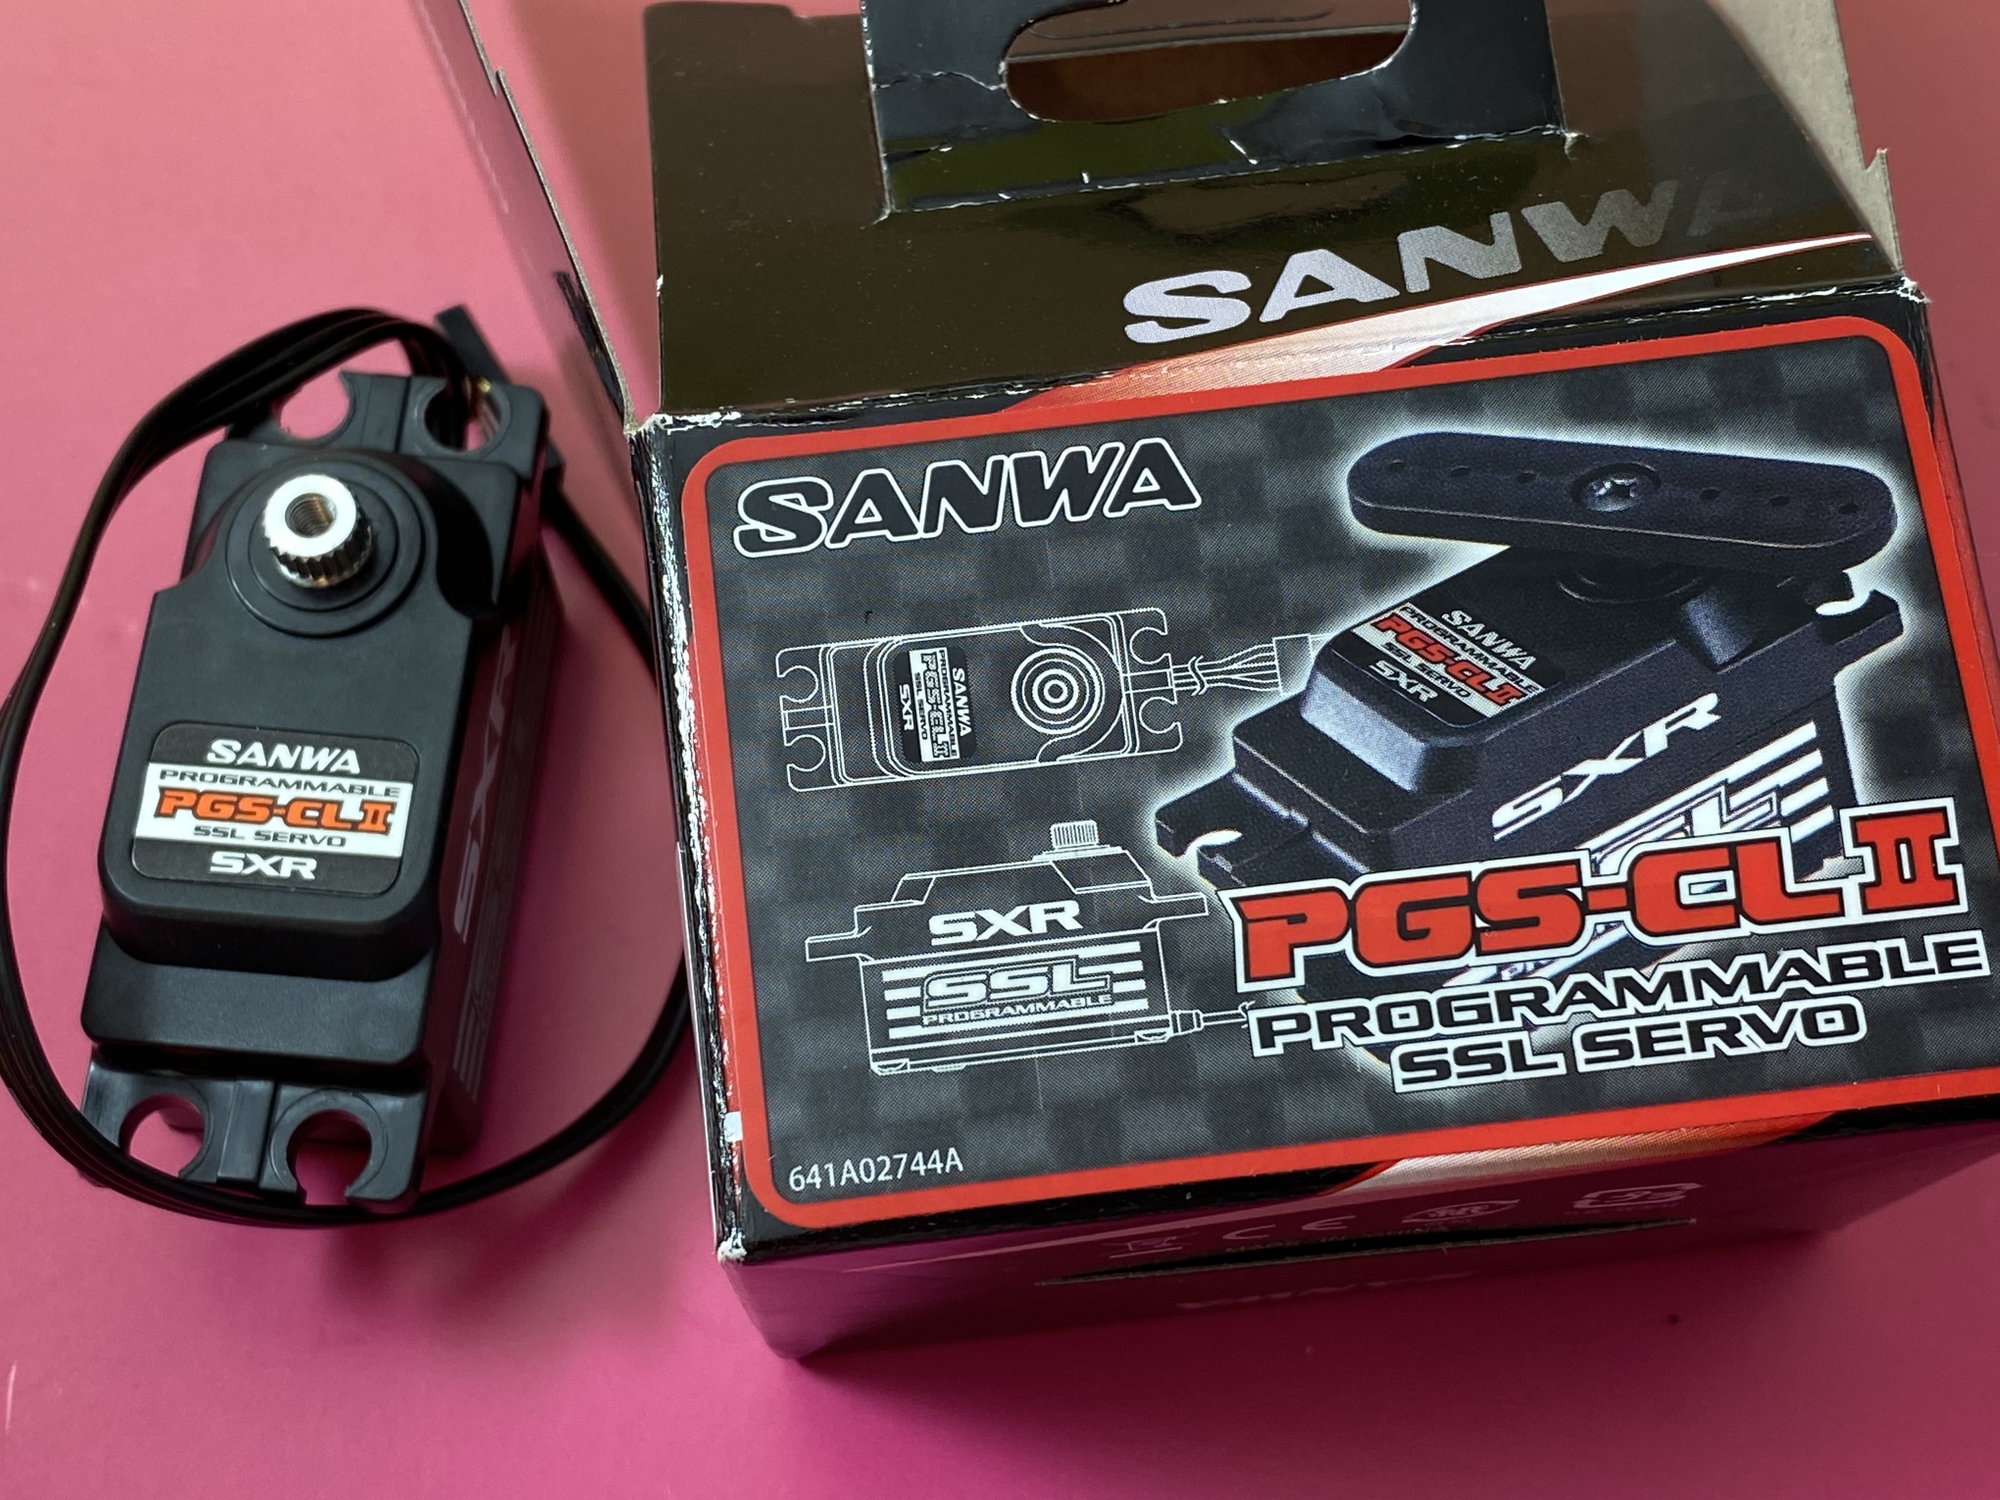 Sanwa/Airtronics High Voltage PGS-CL II Hi-Speed Programmable Low 